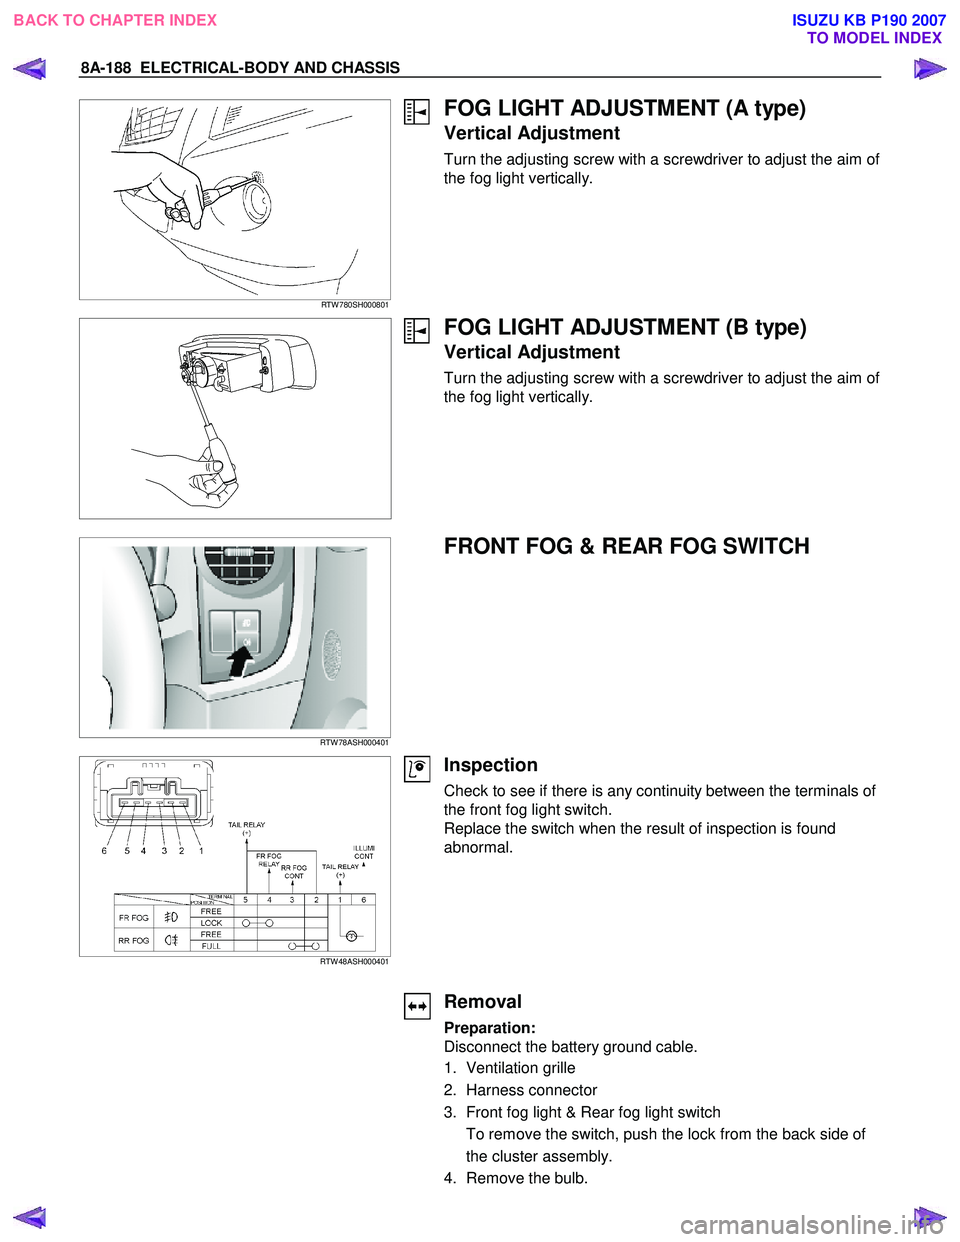 ISUZU KB P190 2007  Workshop Repair Manual 8A-188  ELECTRICAL-BODY AND CHASSIS 
  
 RTW 780SH000801 
FOG LIGHT ADJUSTMENT (A type) 
Vertical Adjustment 
Turn the adjusting screw with a screwdriver to adjust the aim of  
the fog light verticall